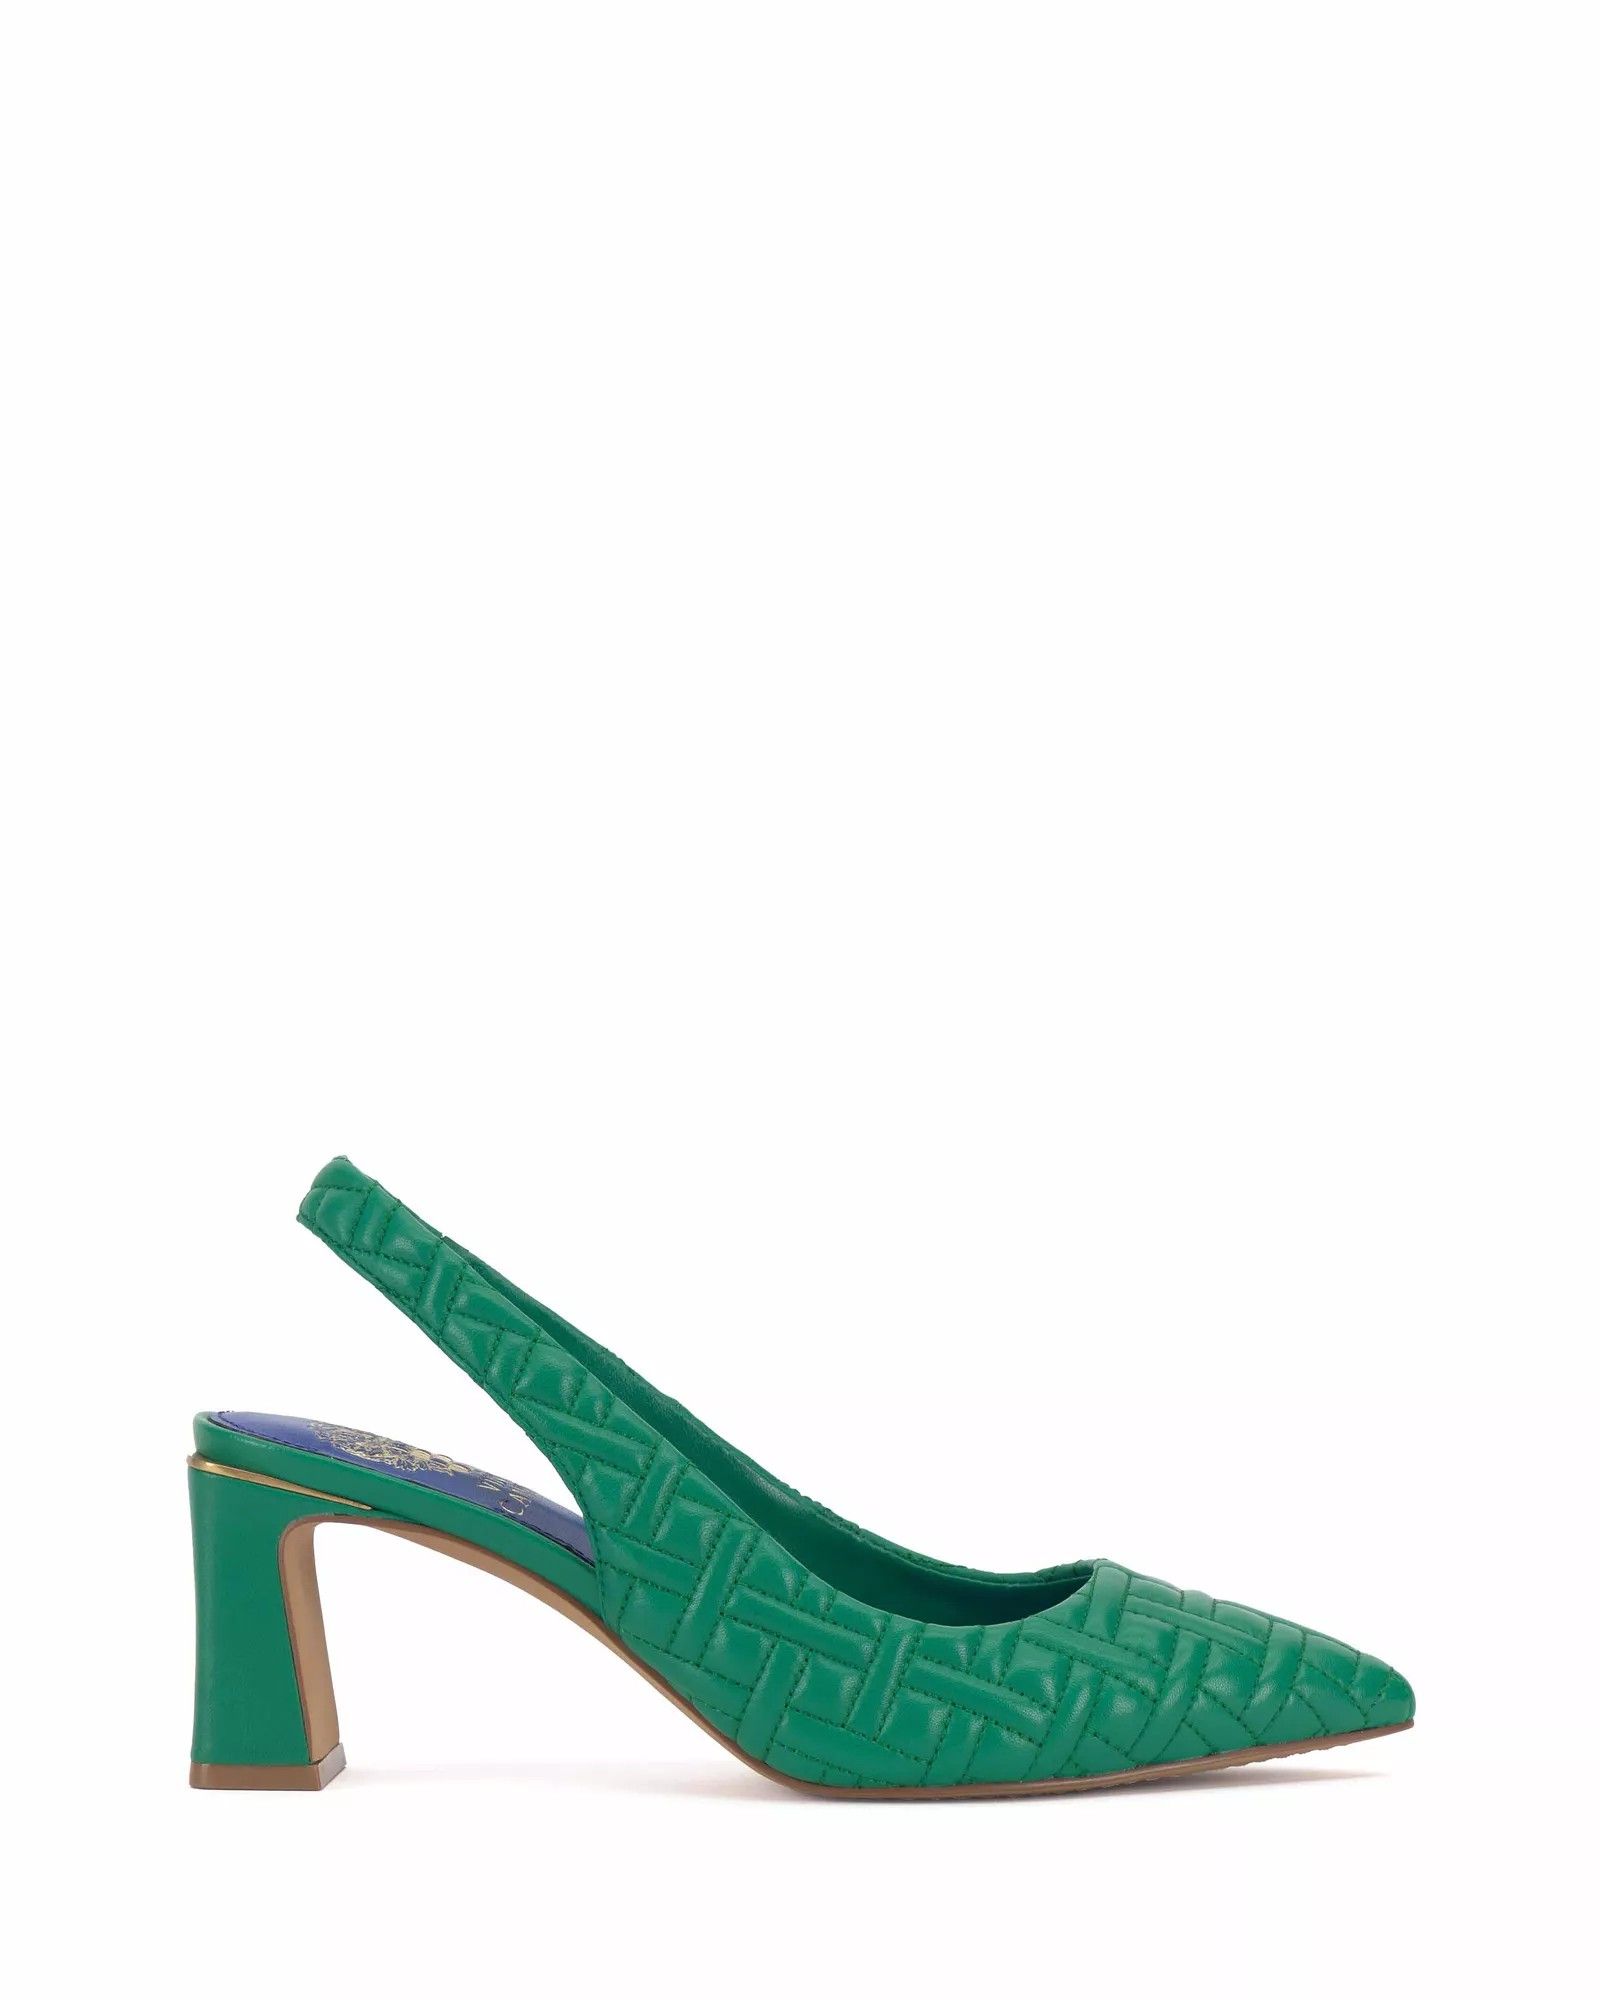 Vince Camuto Hamden Quilted Slingback Pump | Vince Camuto